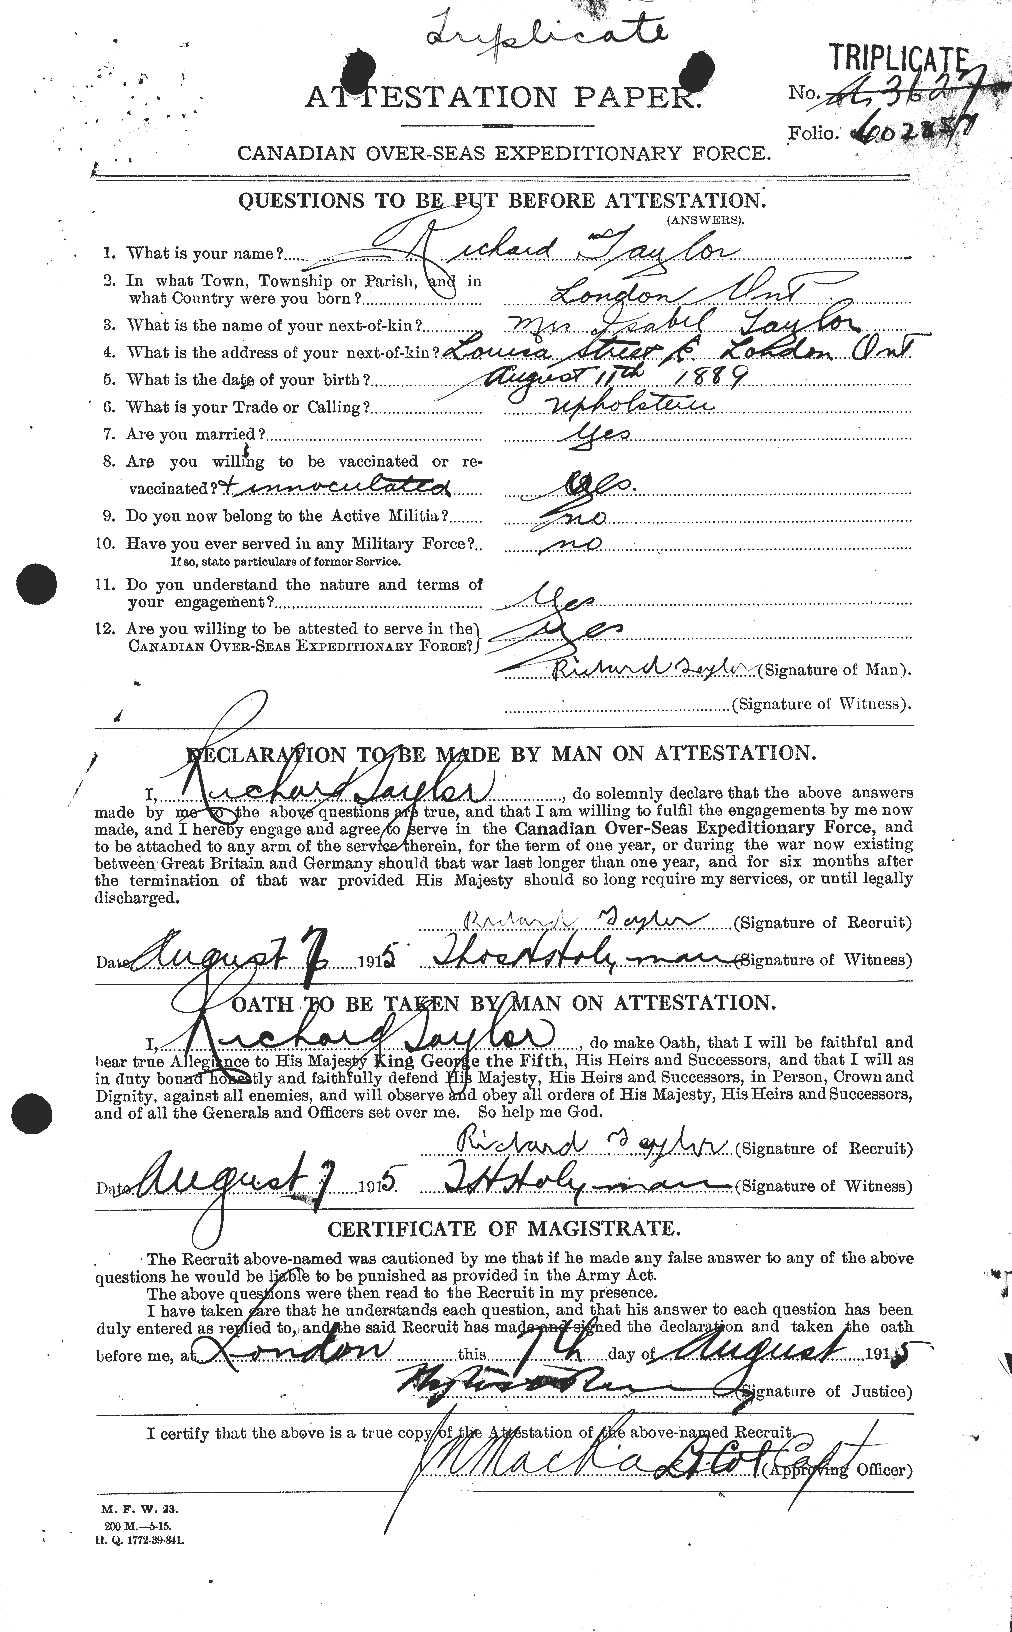 Personnel Records of the First World War - CEF 627817a